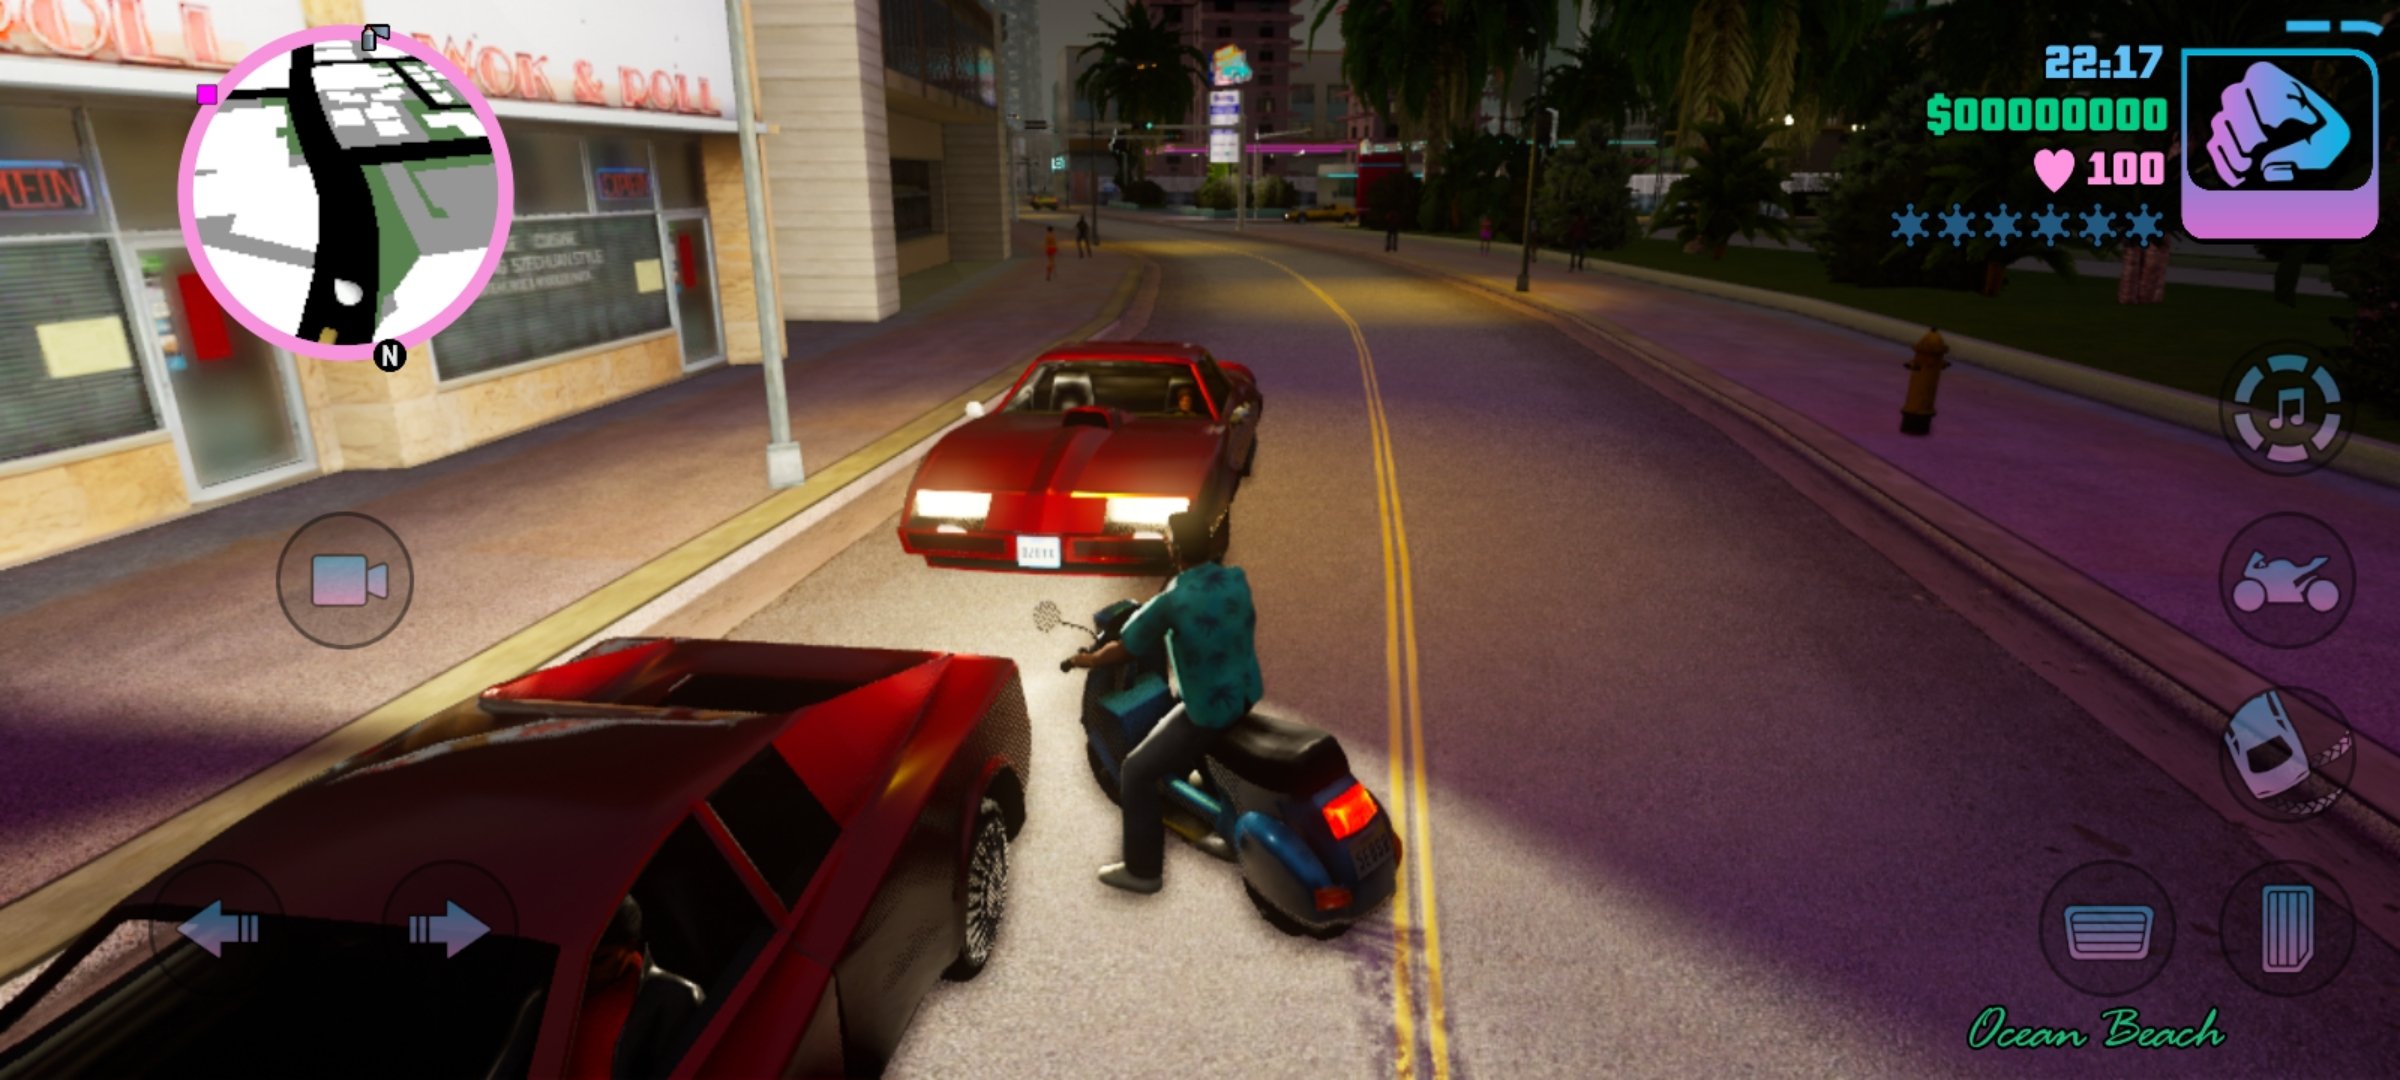 Guide for GTA Vice City APK for Android Download